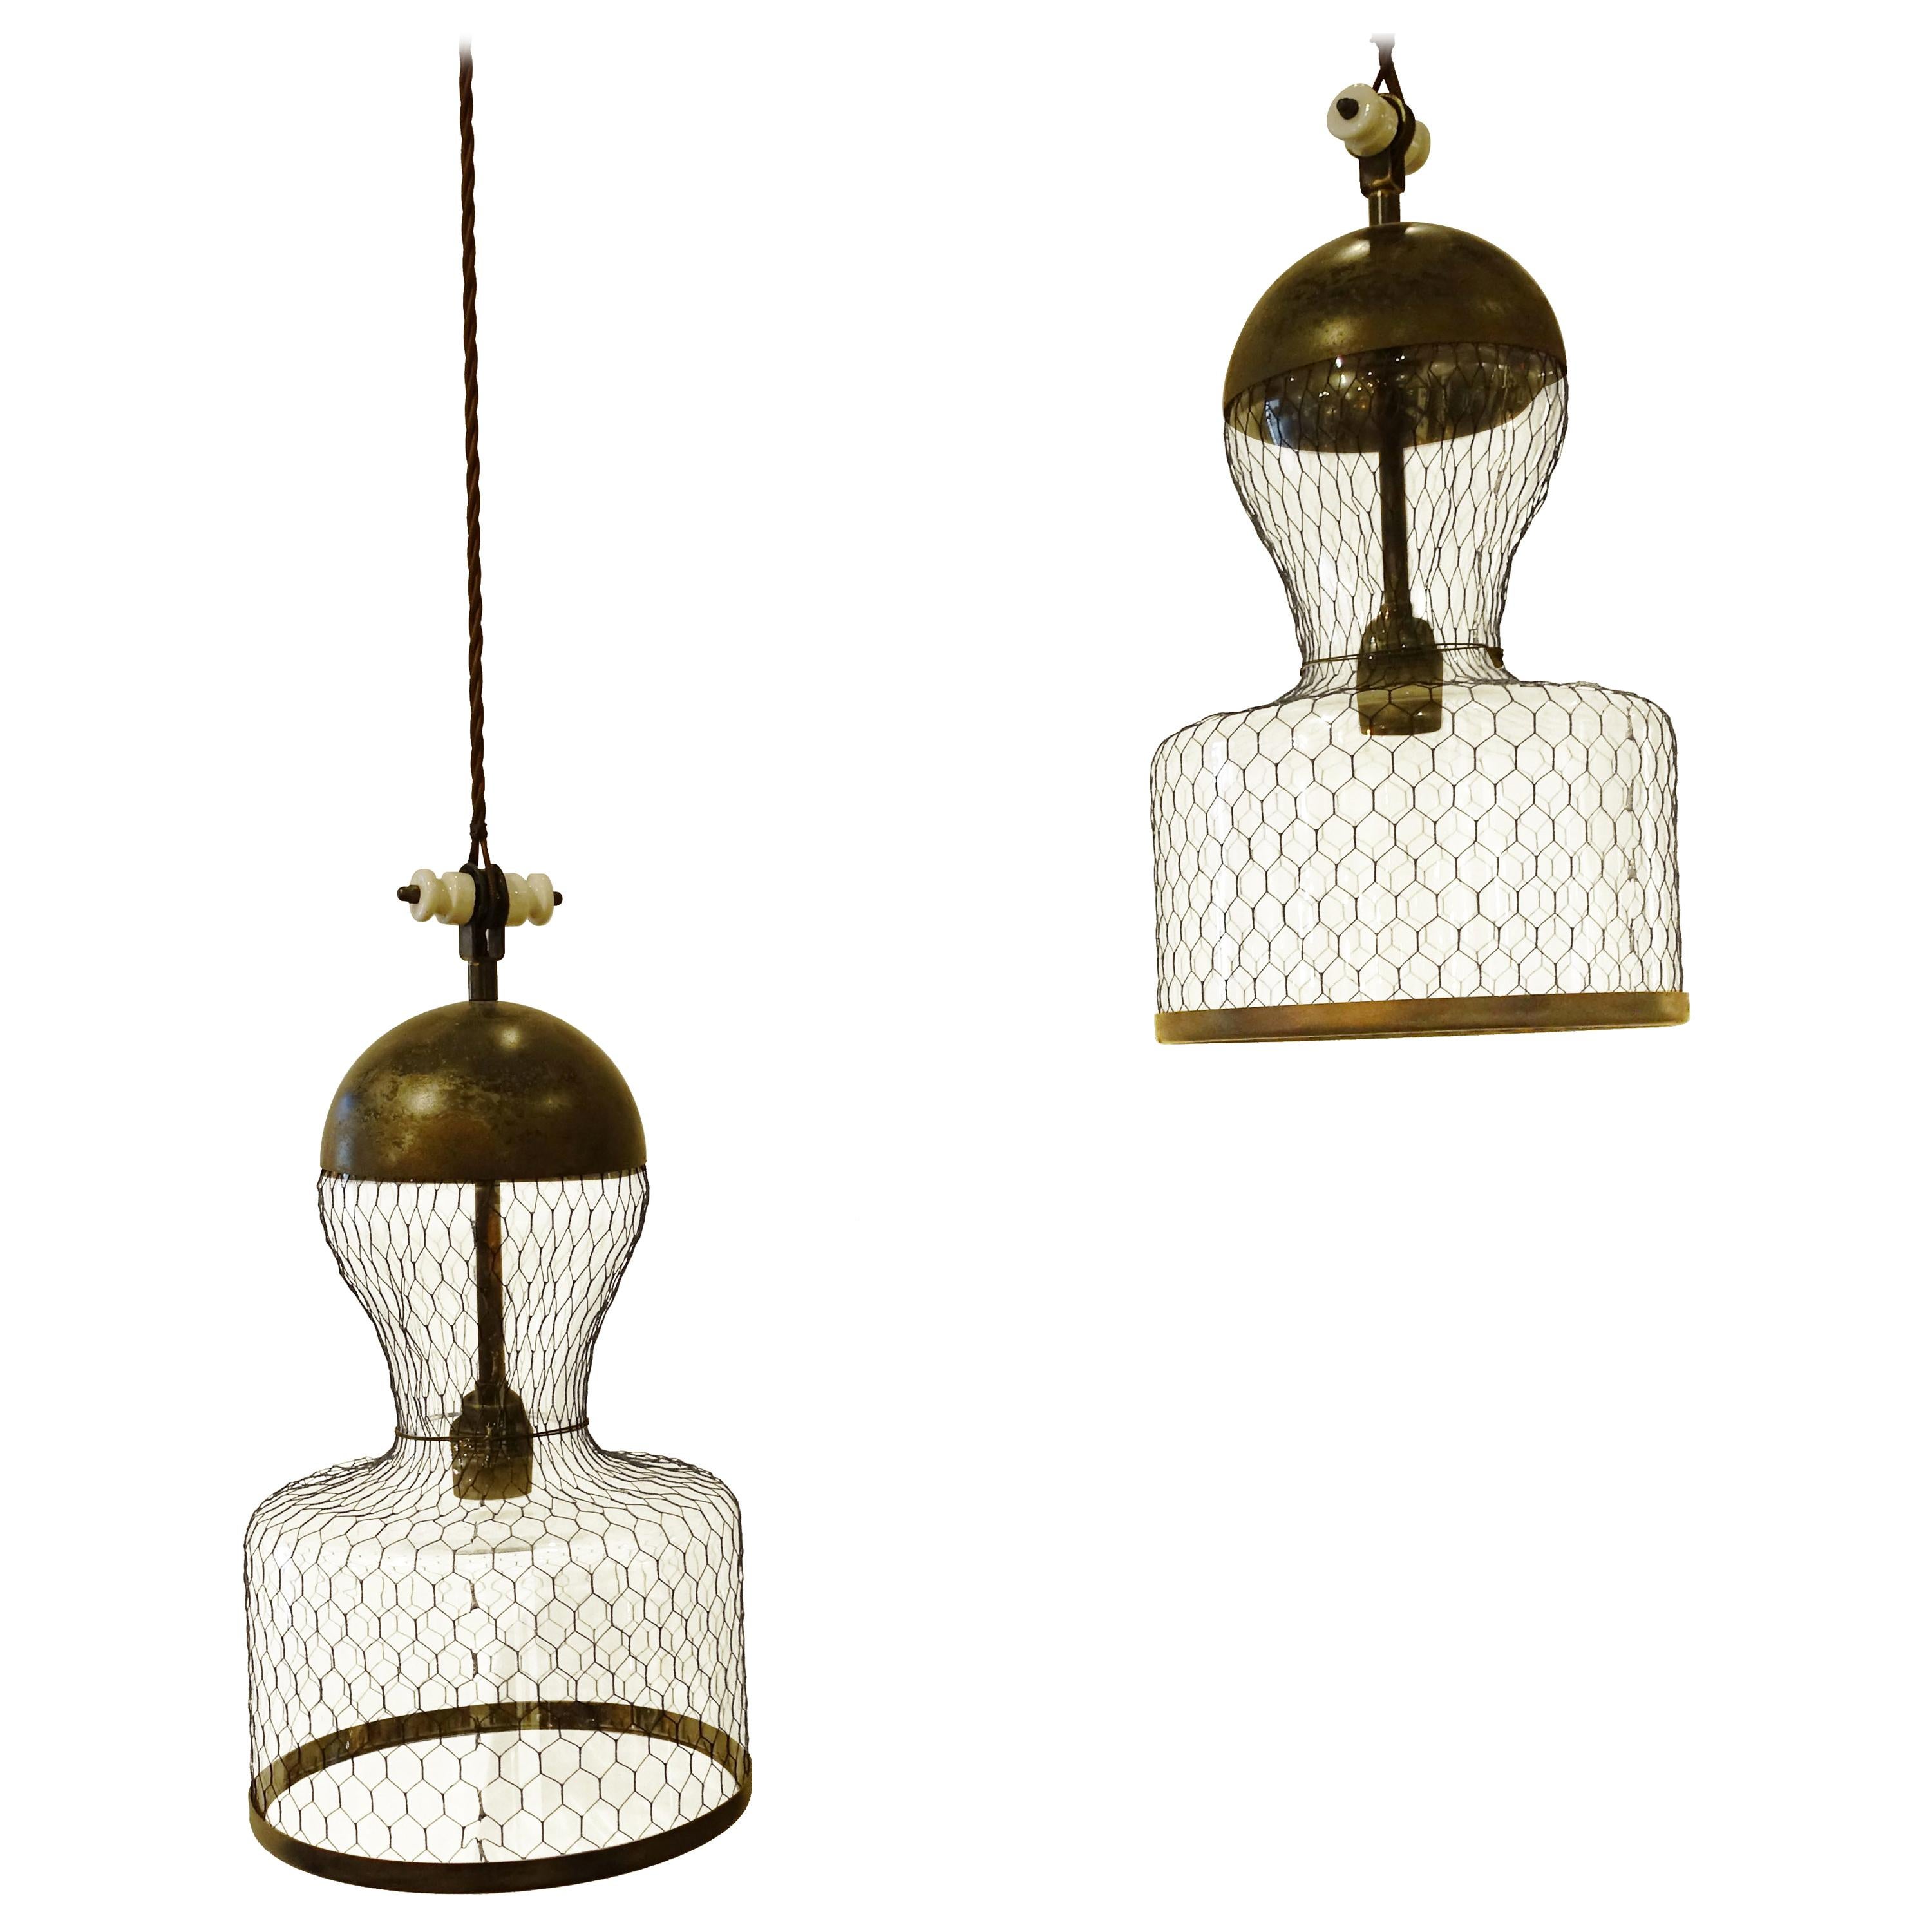 Mesh Covered Pair of Pendant Light Fixtures, Italy, Contemporary